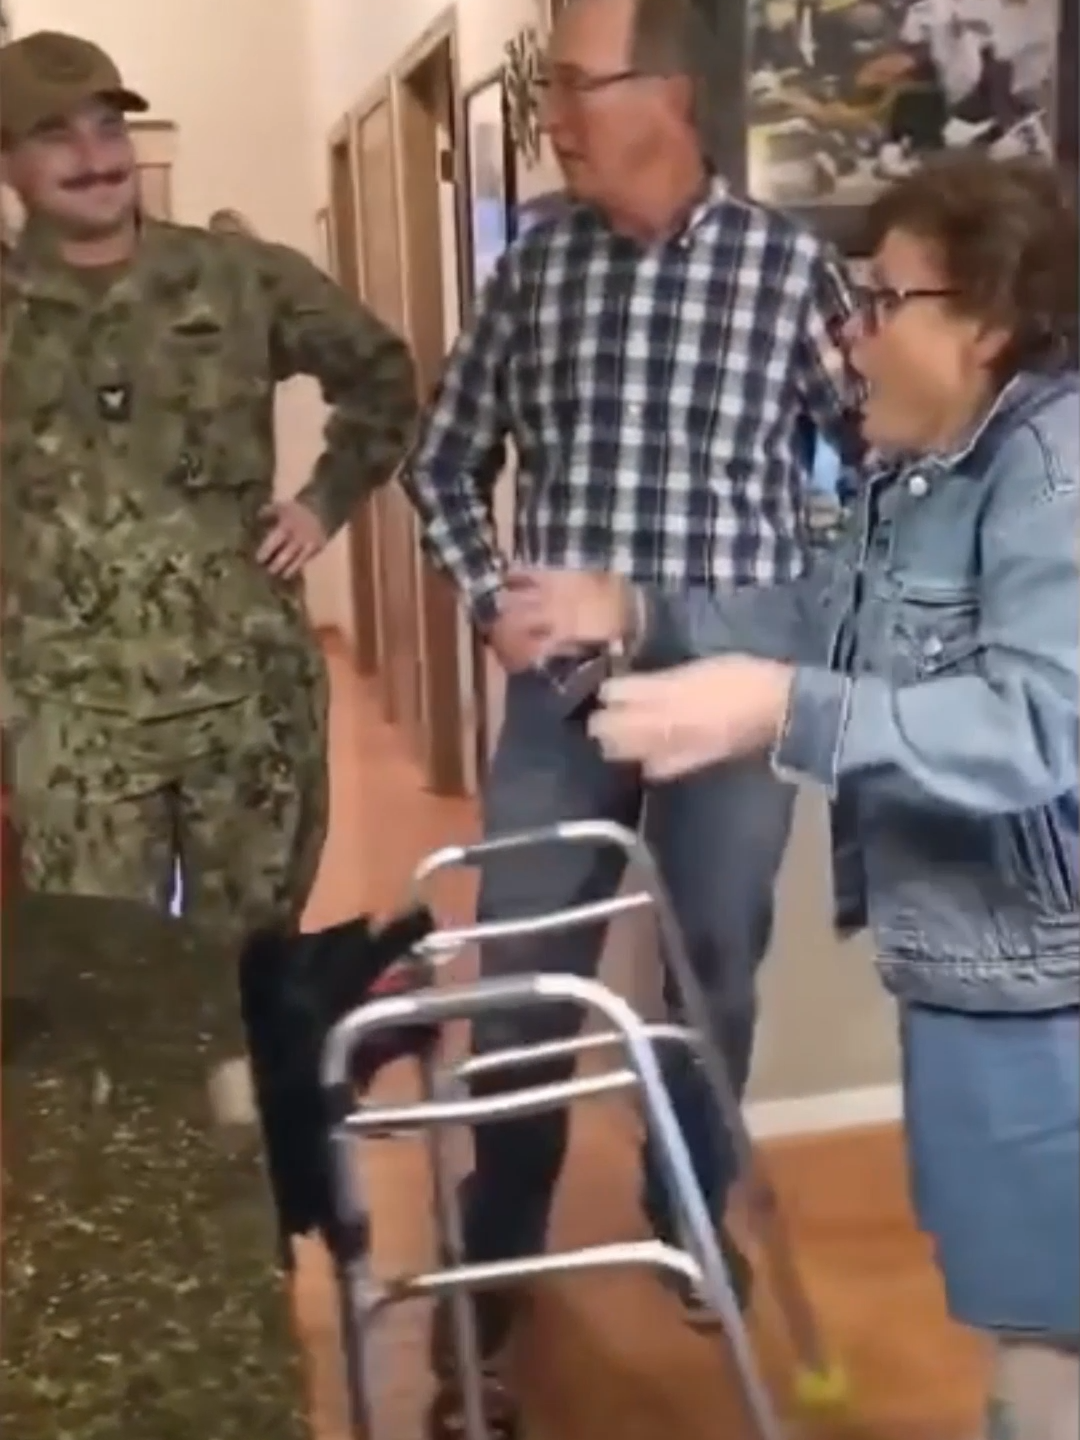 Soldiers coming home and surprise their family ❤️ #military #viral #feelings #welcomehome